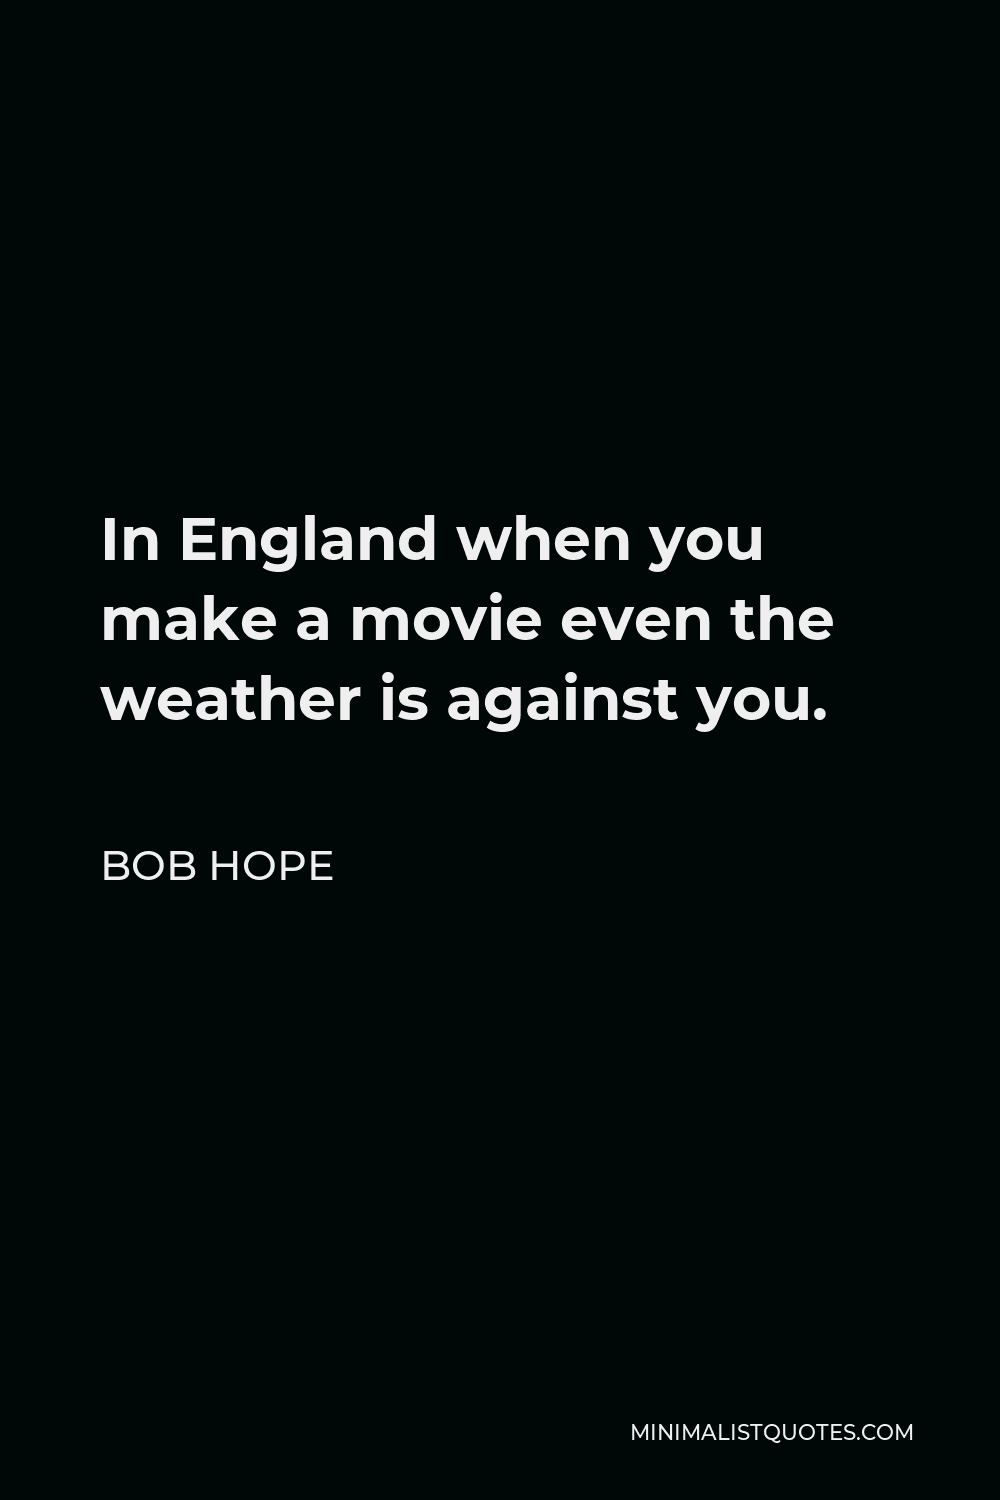 Bob Hope Quote - In England when you make a movie even the weather is against you.